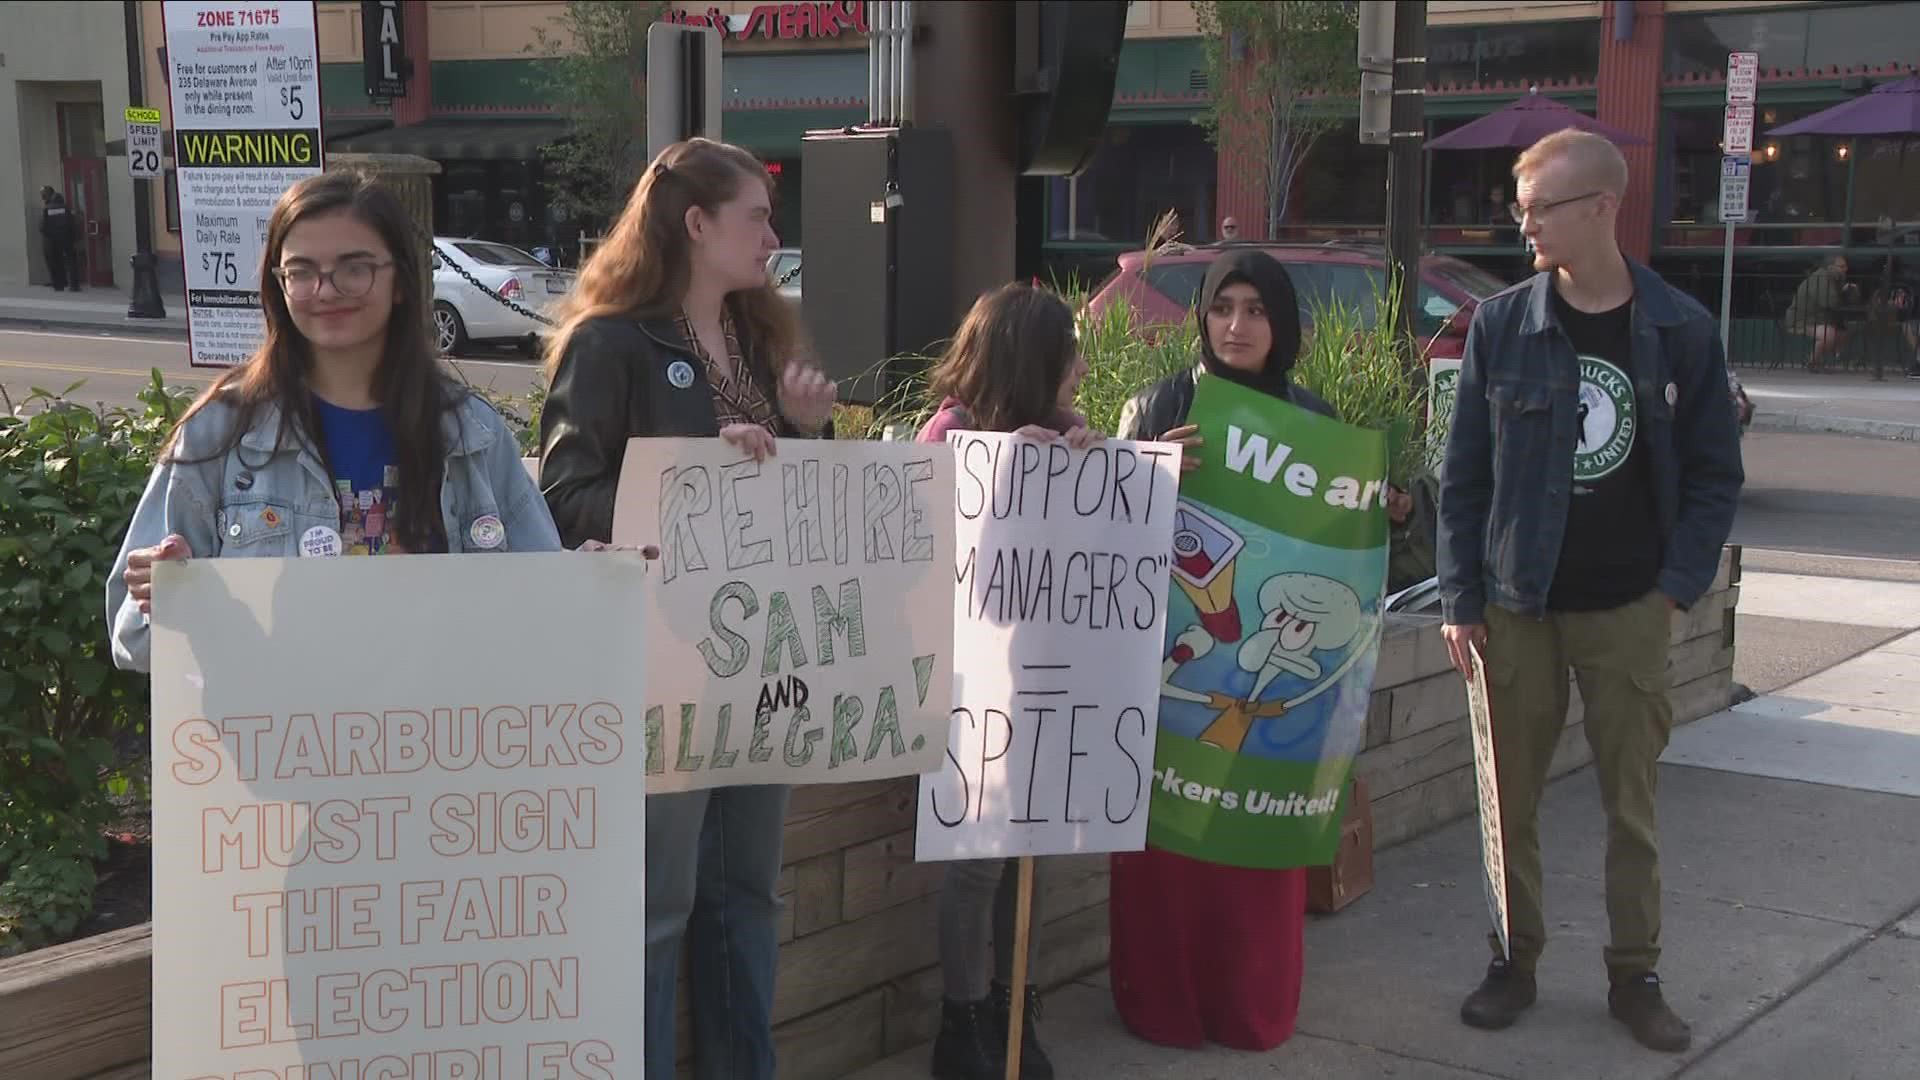 Baristas say they are frustrated with retaliation tactics they believe the company is using against union organizers.